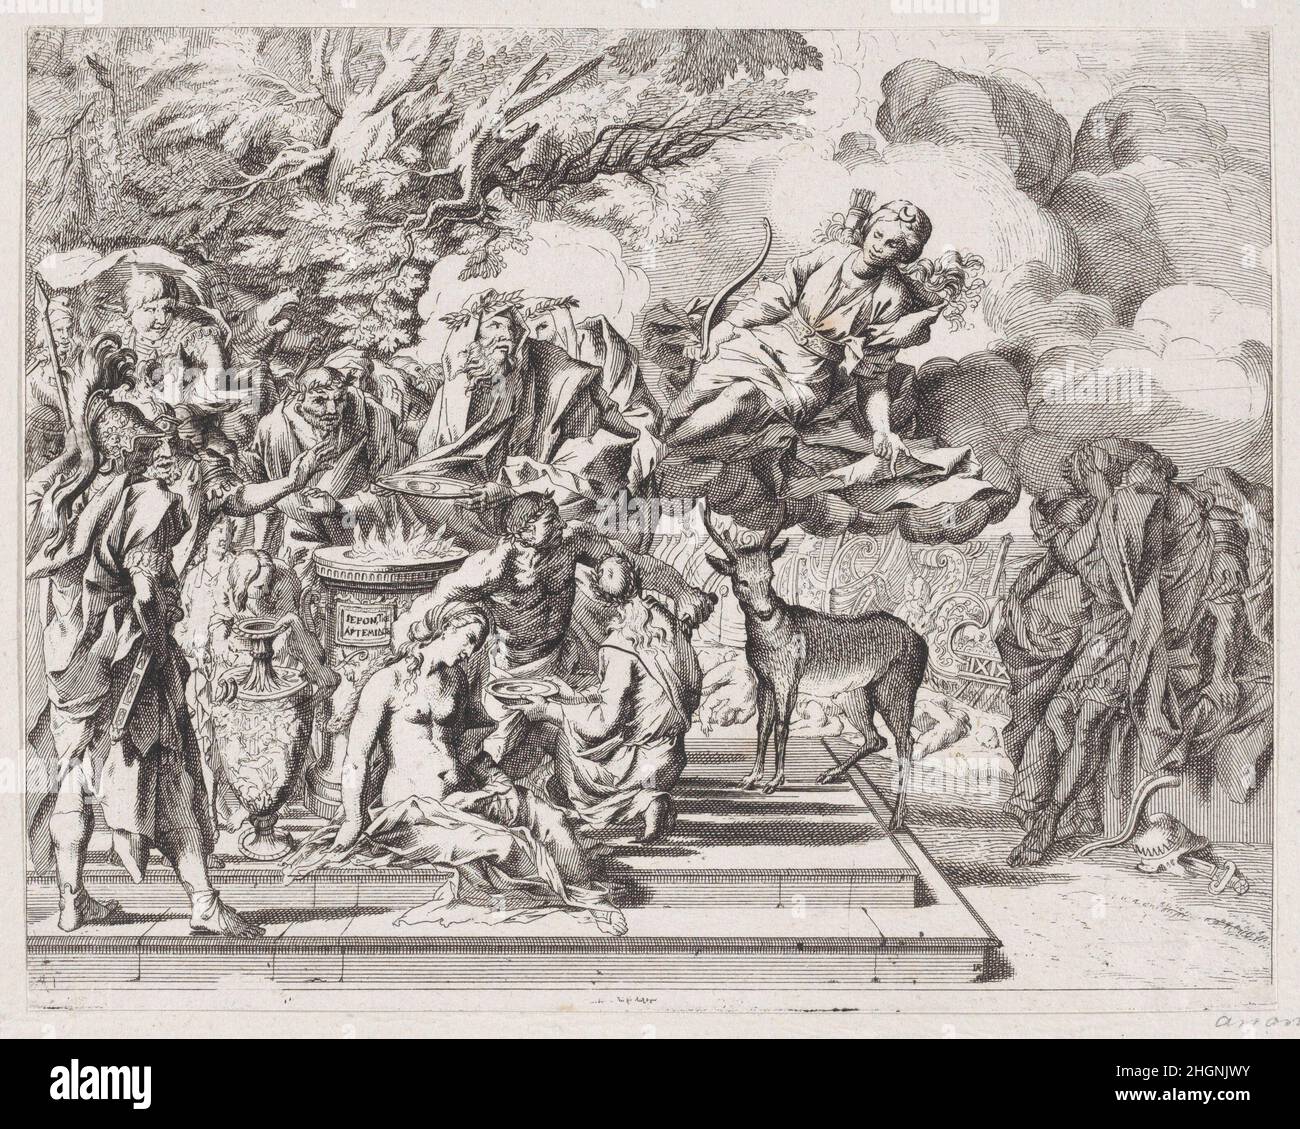 The sacrifice of Iphigenia 1650–1700 Attributed to Arnold van Westerhout Flemish This is a copy in reverse after Testa's print, for which see B.XX.221.23. The sacrifice of Iphigenia. Attributed to Arnold van Westerhout (Flemish, Antwerp 1651–1725 Rome). 1650–1700. Etching. Prints Stock Photo